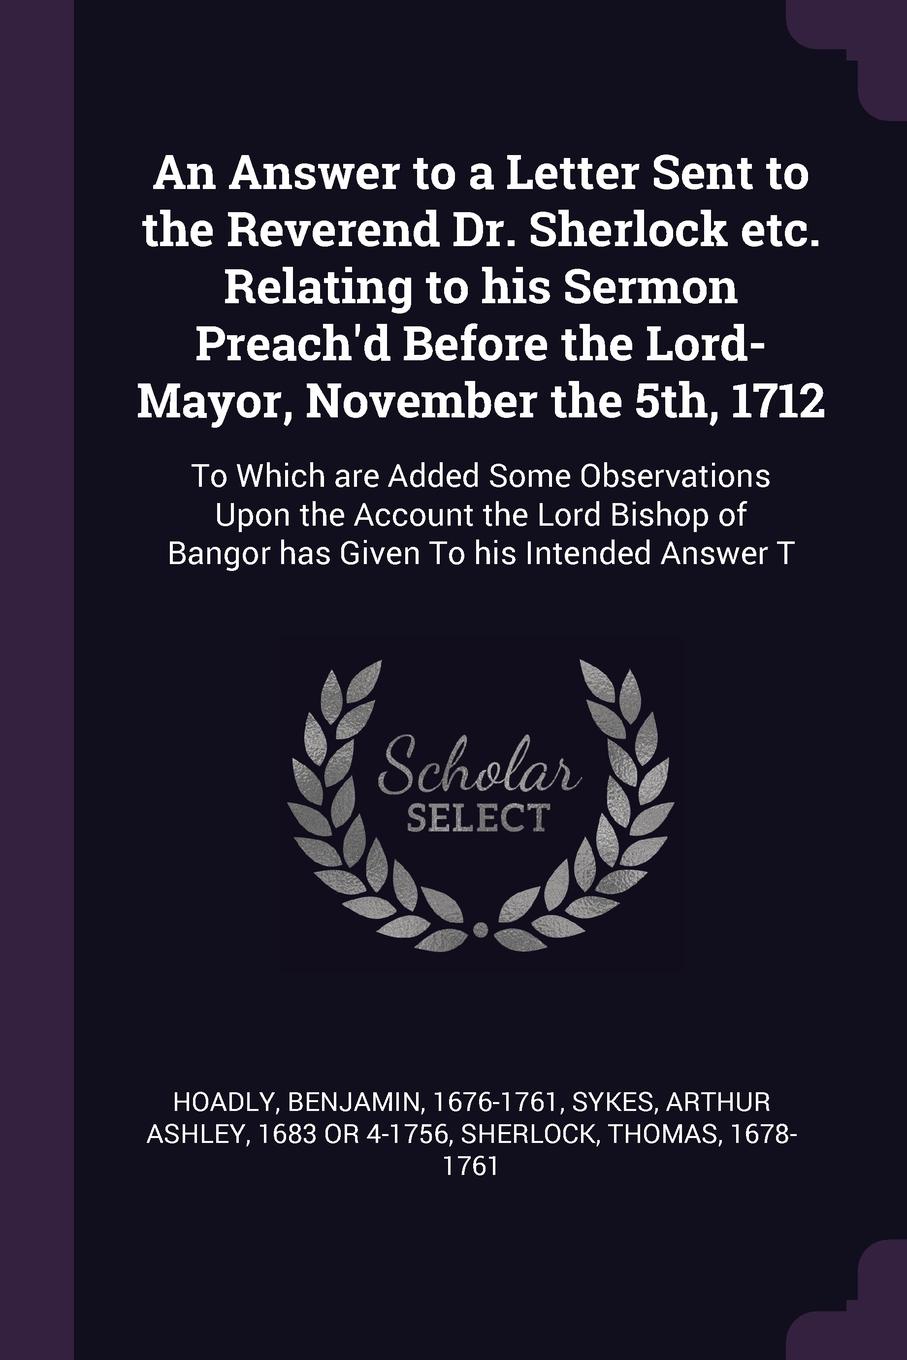 An Answer to a Letter Sent to the Reverend Dr. Sherlock etc. Relating to his Sermon Preach`d Before the Lord-Mayor, November the 5th, 1712. To Which are Added Some Observations Upon the Account the Lord Bishop of Bangor has Given To his Intended A...